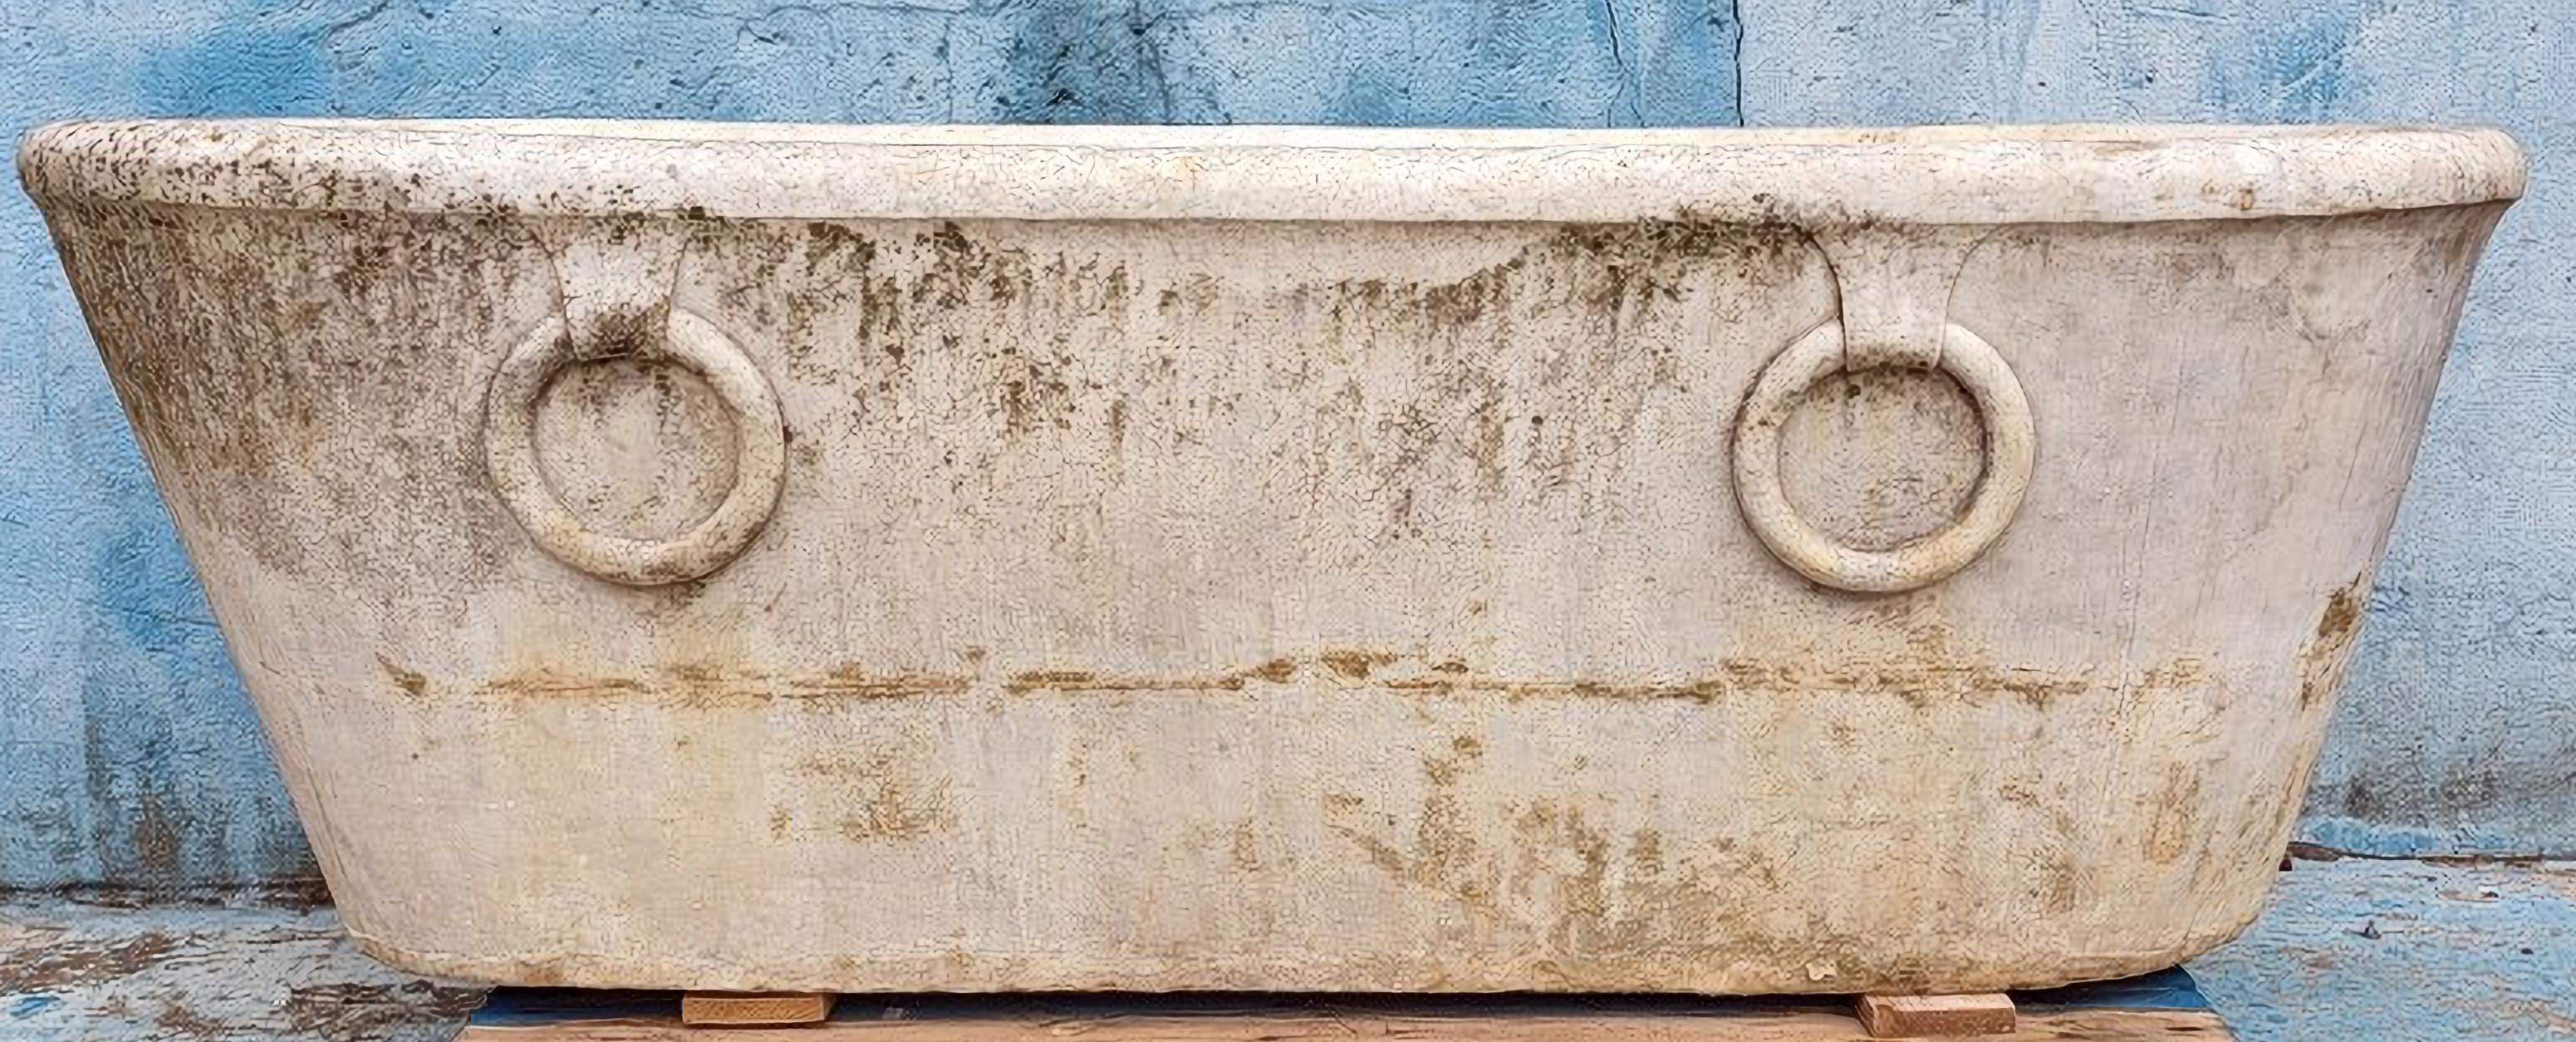 Hand-Carved Amazing Antique Bathtub in Carrara White Marble with Rings 18th Century For Sale